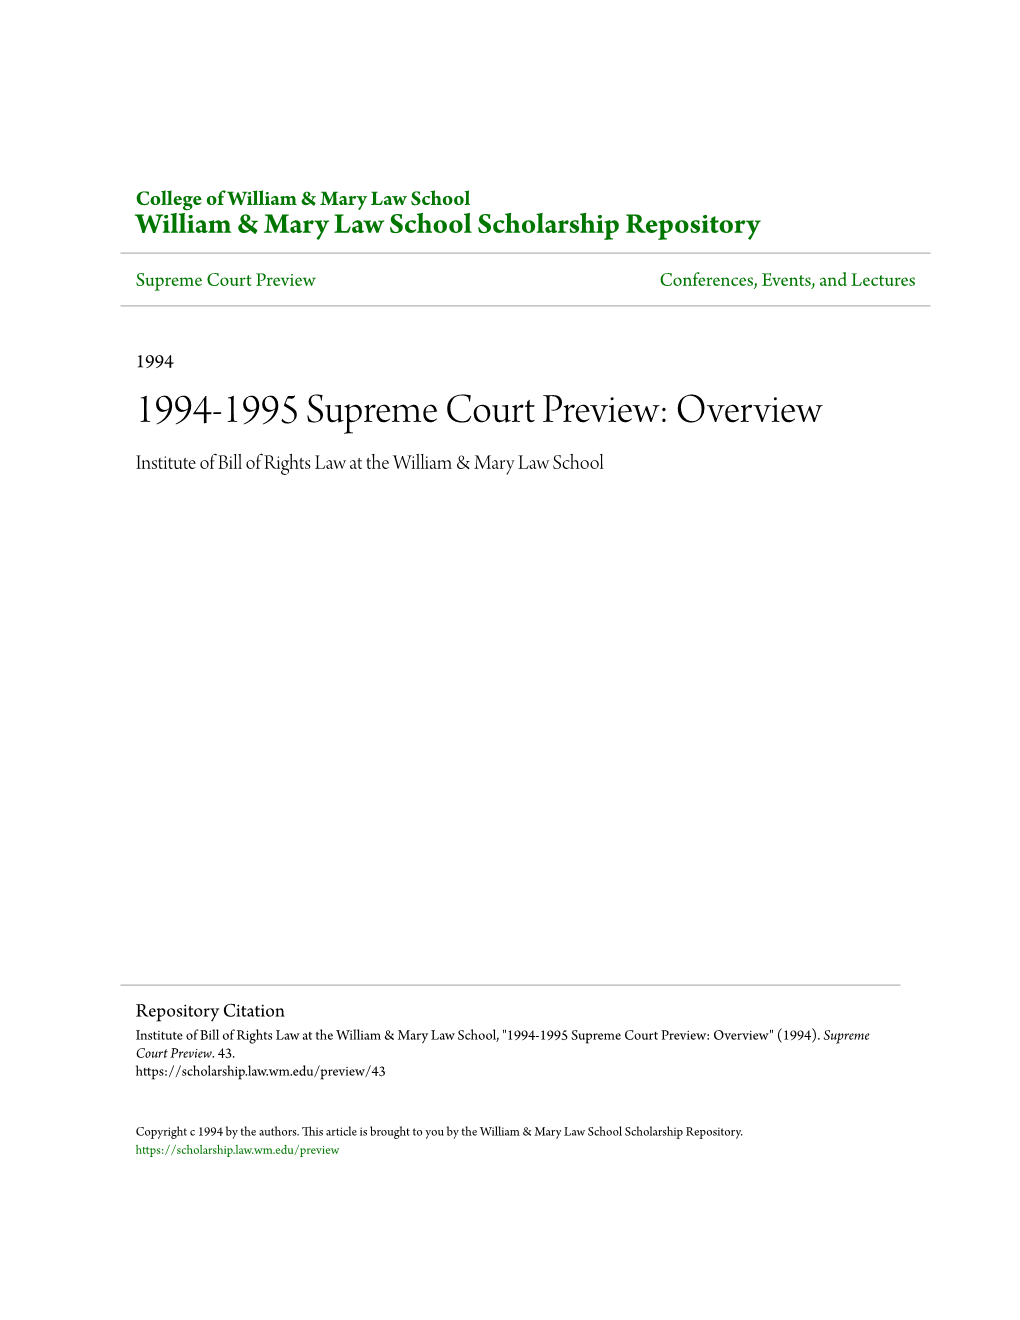 1994-1995 Supreme Court Preview: Overview Institute of Bill of Rights Law at the William & Mary Law School